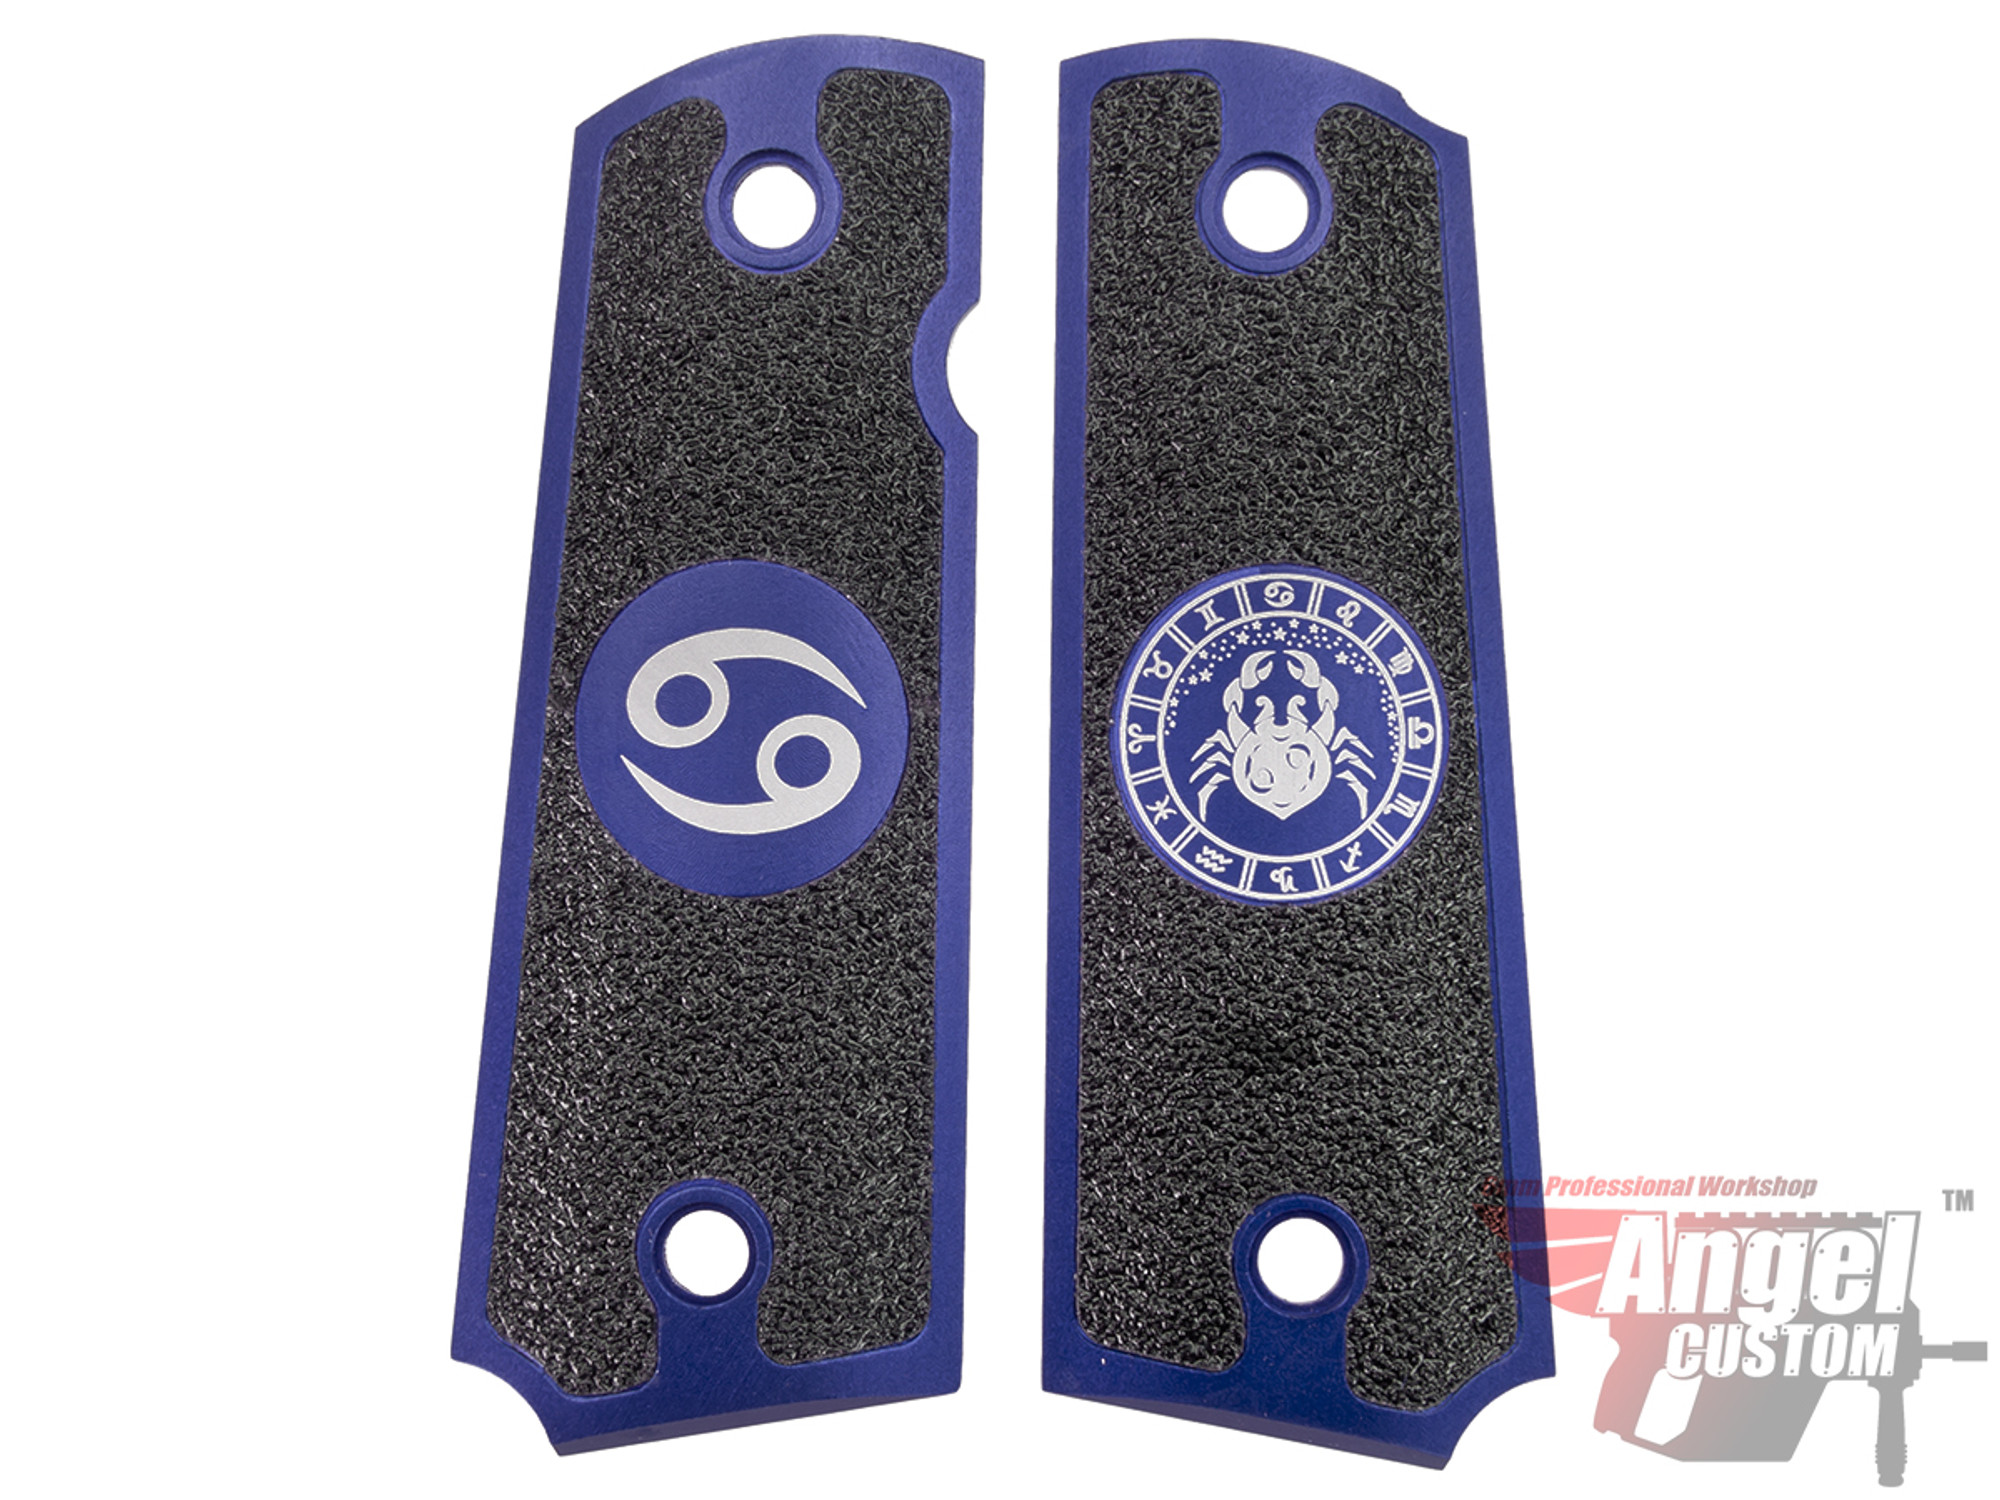 Angel Custom CNC Machined Tac-Glove "Zodiac" Grips for Tokyo Marui/KWA/Western Arms 1911 Series Airsoft Pistols - Navy Blue (Sign: Cancer)